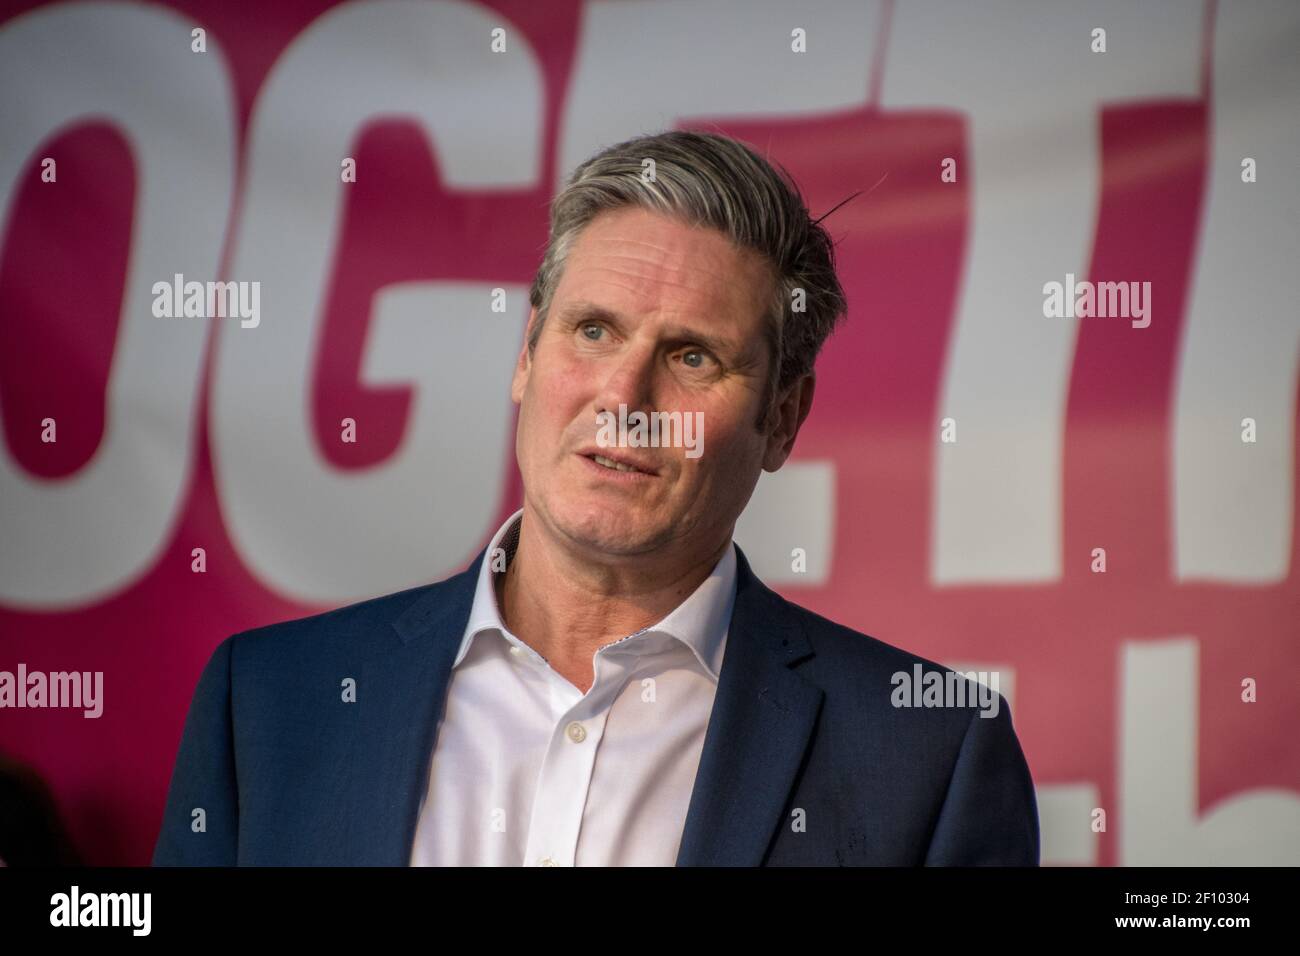 British politician, MP and Labour Party member Sir Keir Starmer speaking at the third People's Vote March, Parliament Square, London, UK on 19 October 2019. Stock Photo